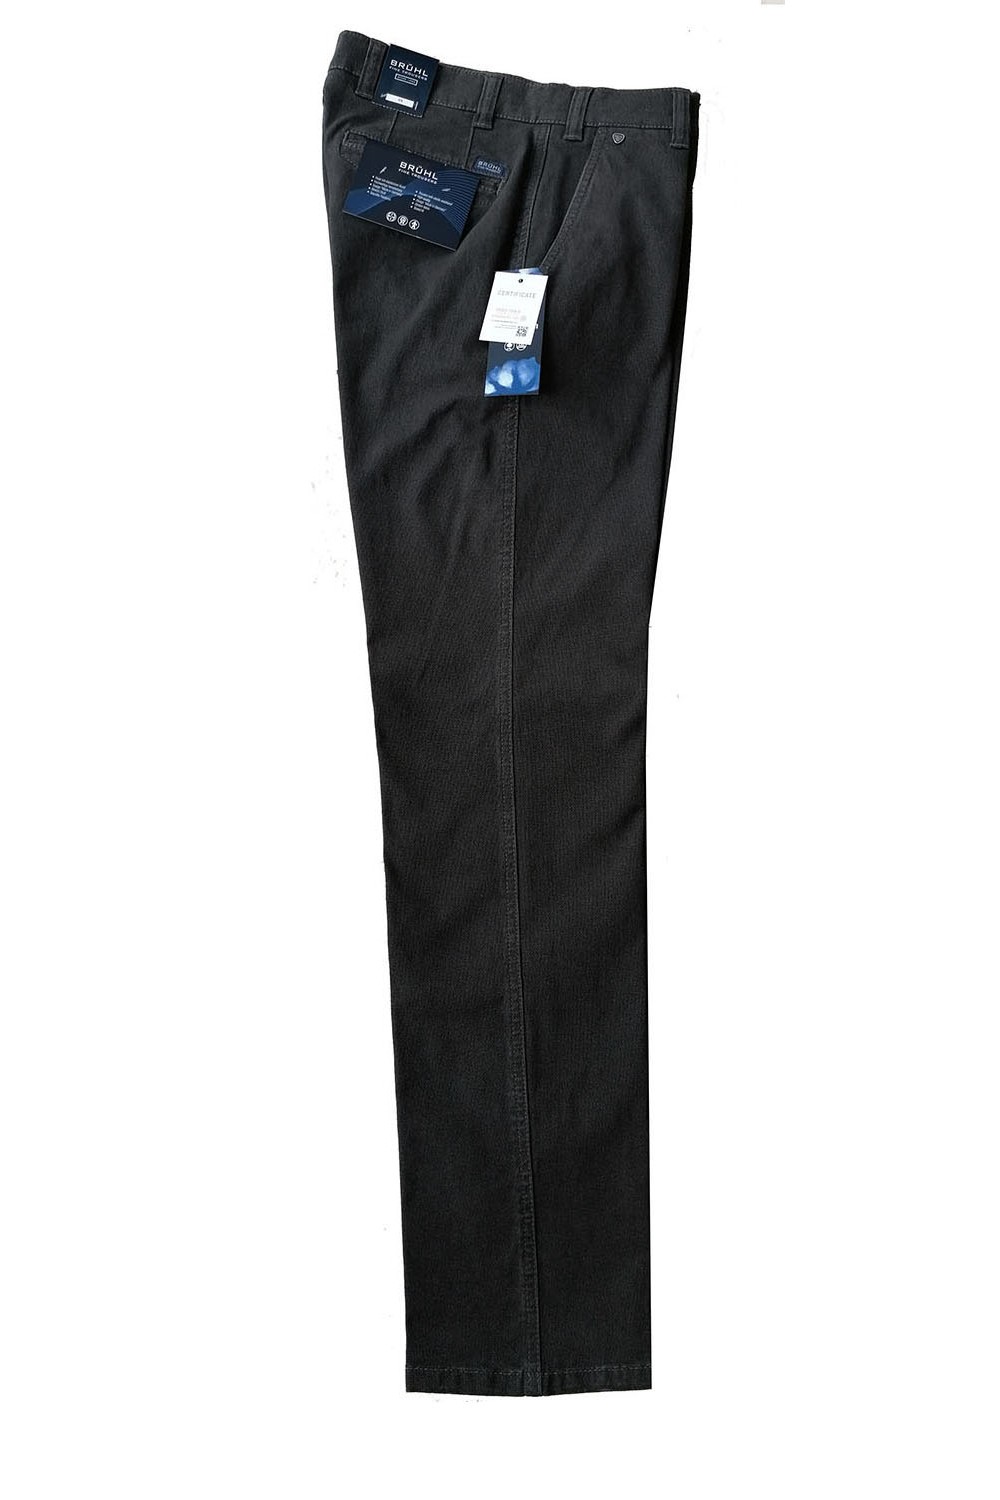 BRUHL Chinos trouser